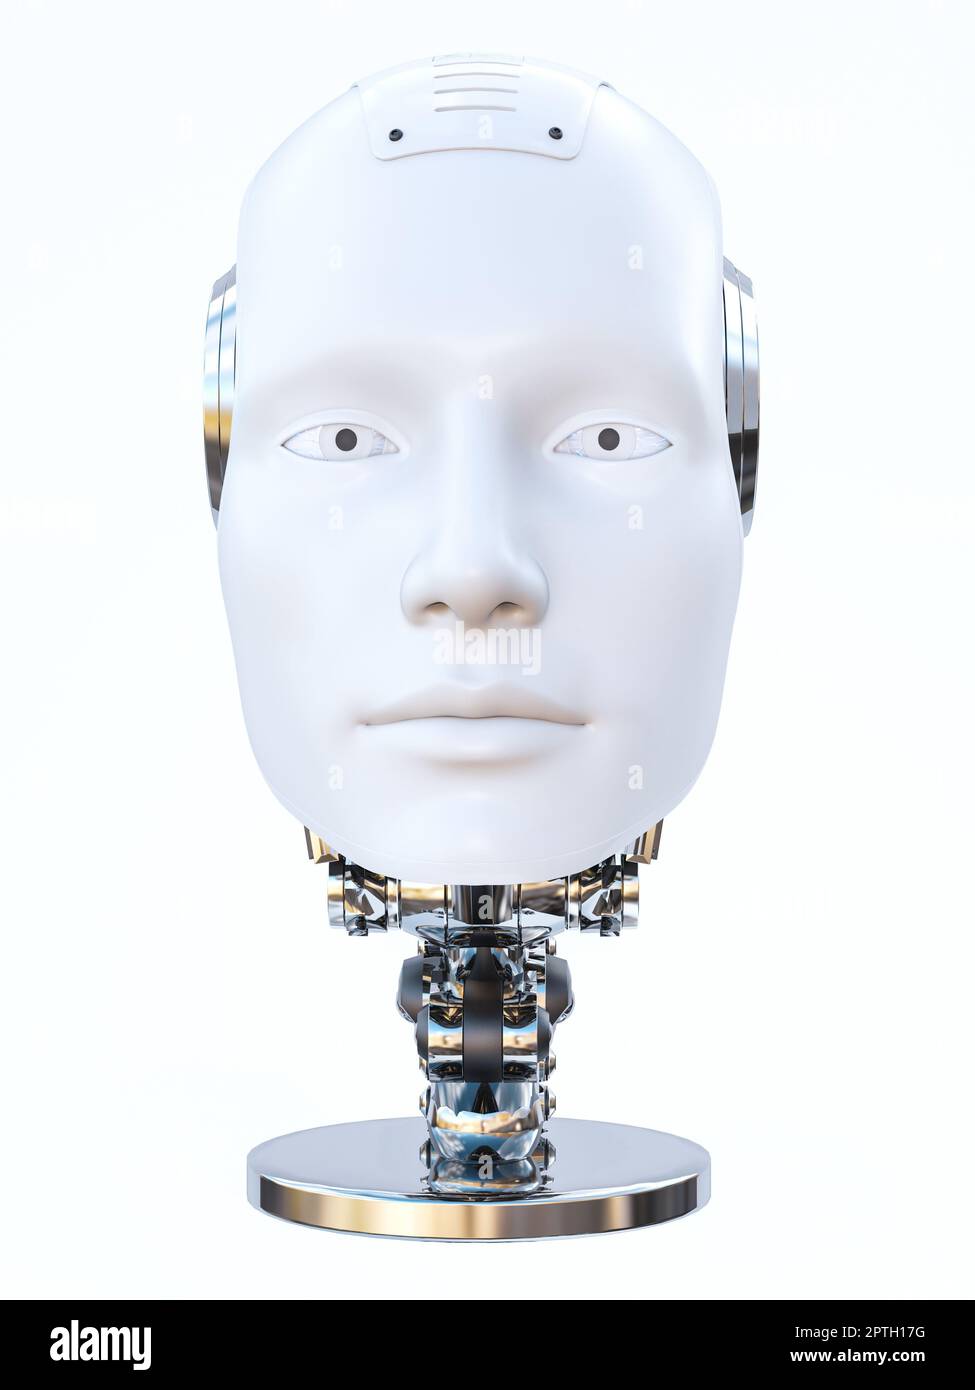 https://c8.alamy.com/comp/2PTH17G/3d-rendering-of-a-severed-android-robot-man-head-with-eyes-open-on-a-stand-or-podium-white-background-futuristic-ai-concept-2PTH17G.jpg